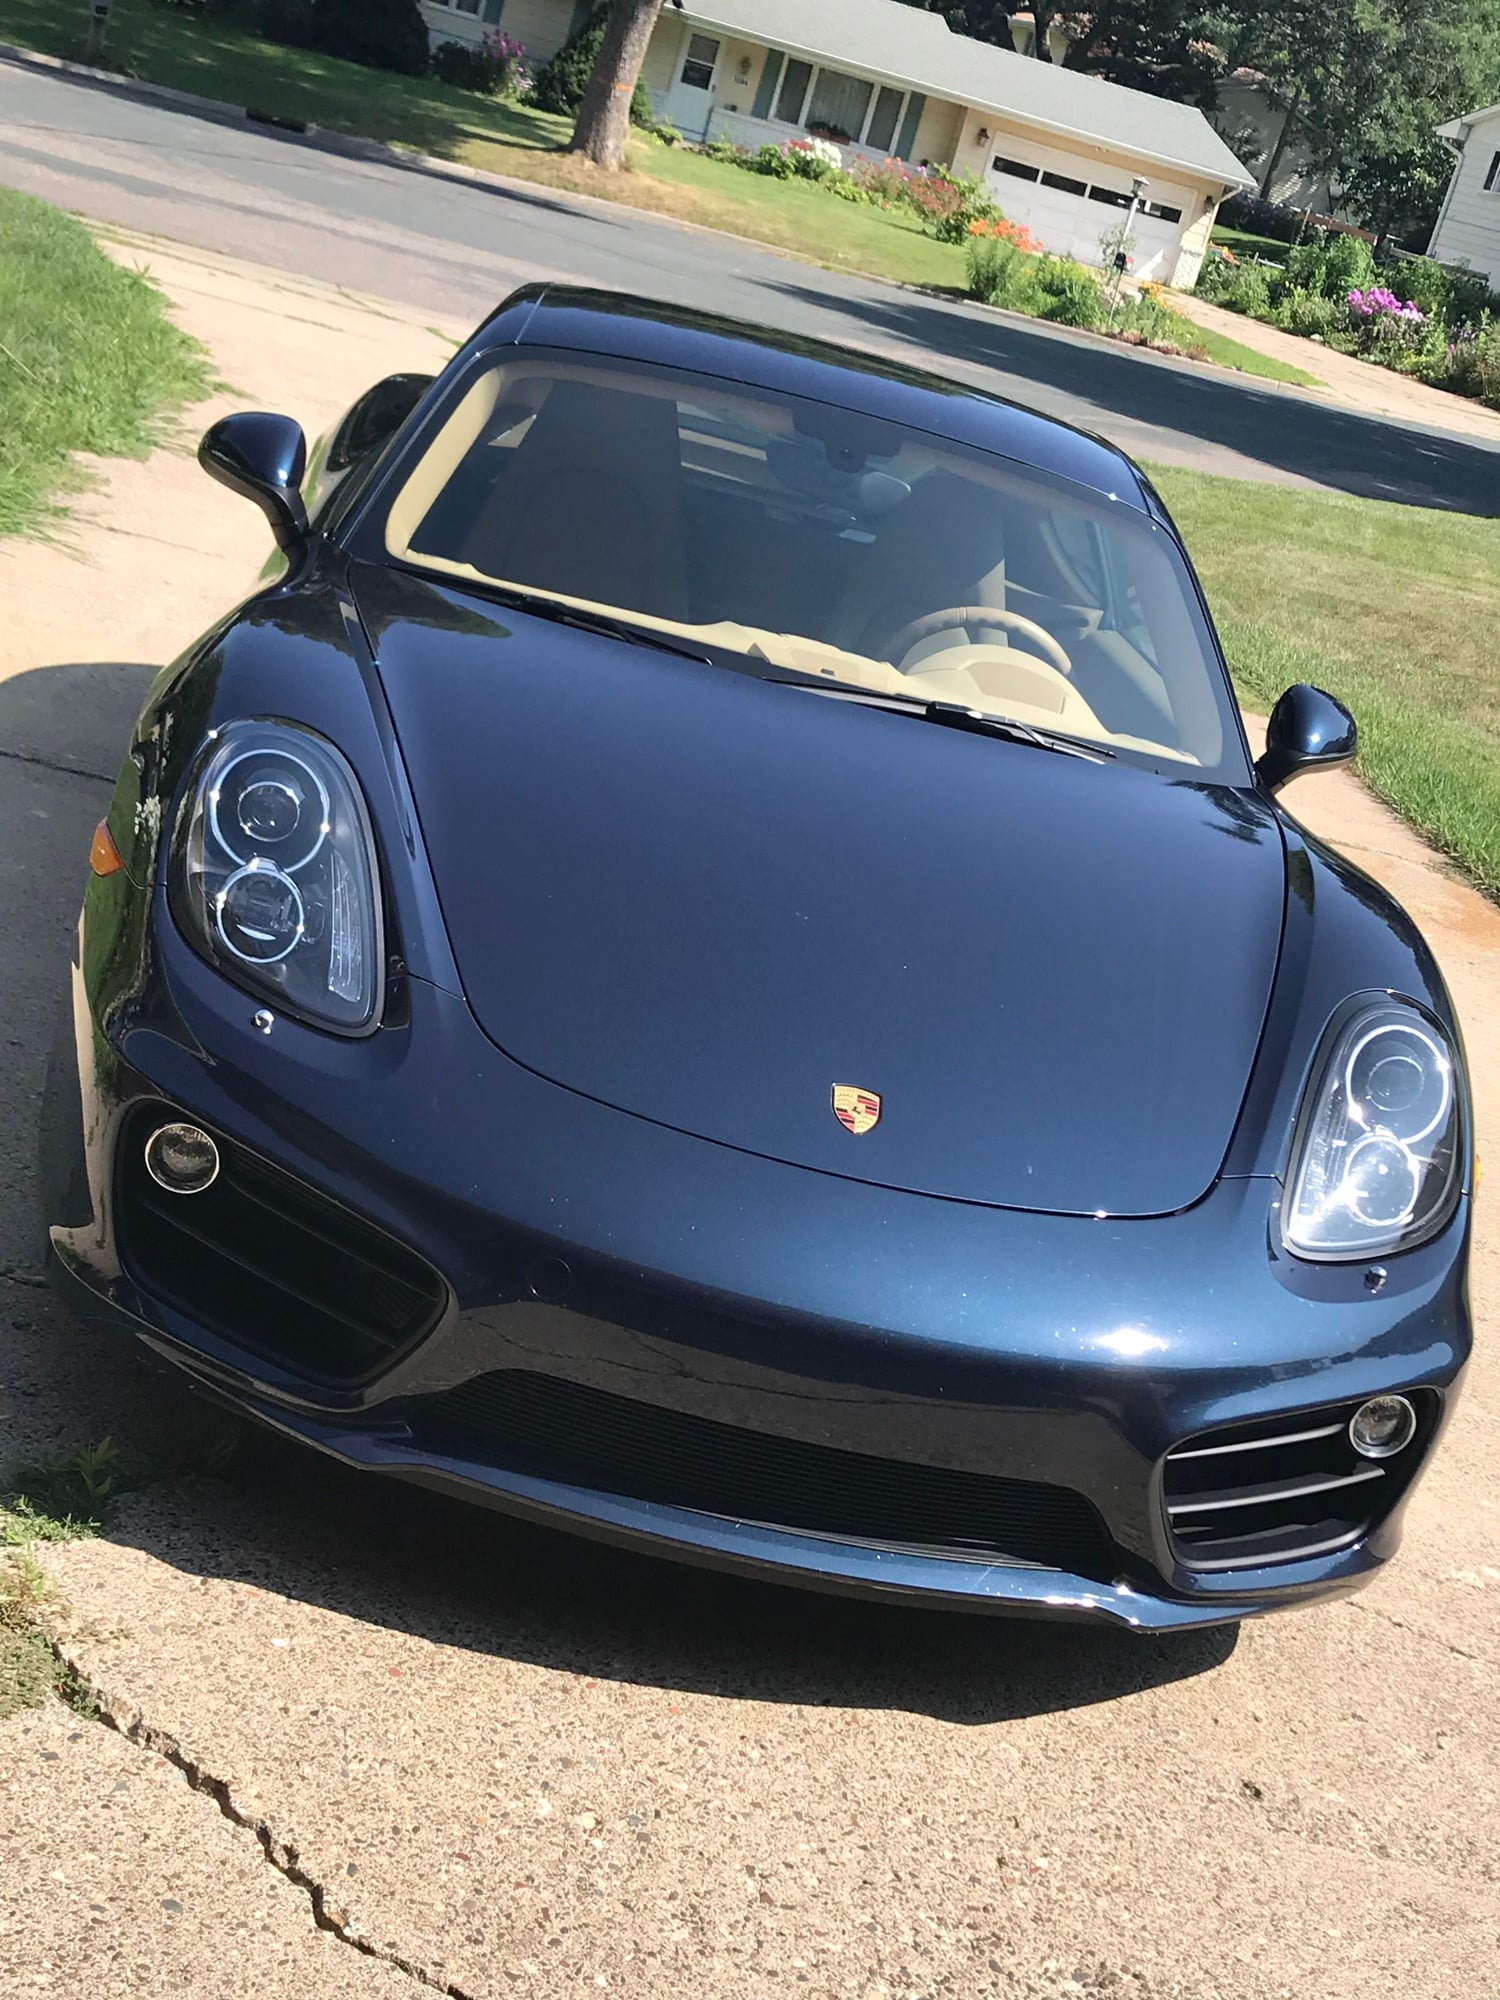 2014 Porsche Cayman - 2014 Cayman S w/6-speed - Used - VIN WP0AB2A84EK193473 - 35,500 Miles - 6 cyl - 2WD - Manual - Coupe - Blue - Minneapolis, MN 55401, United States